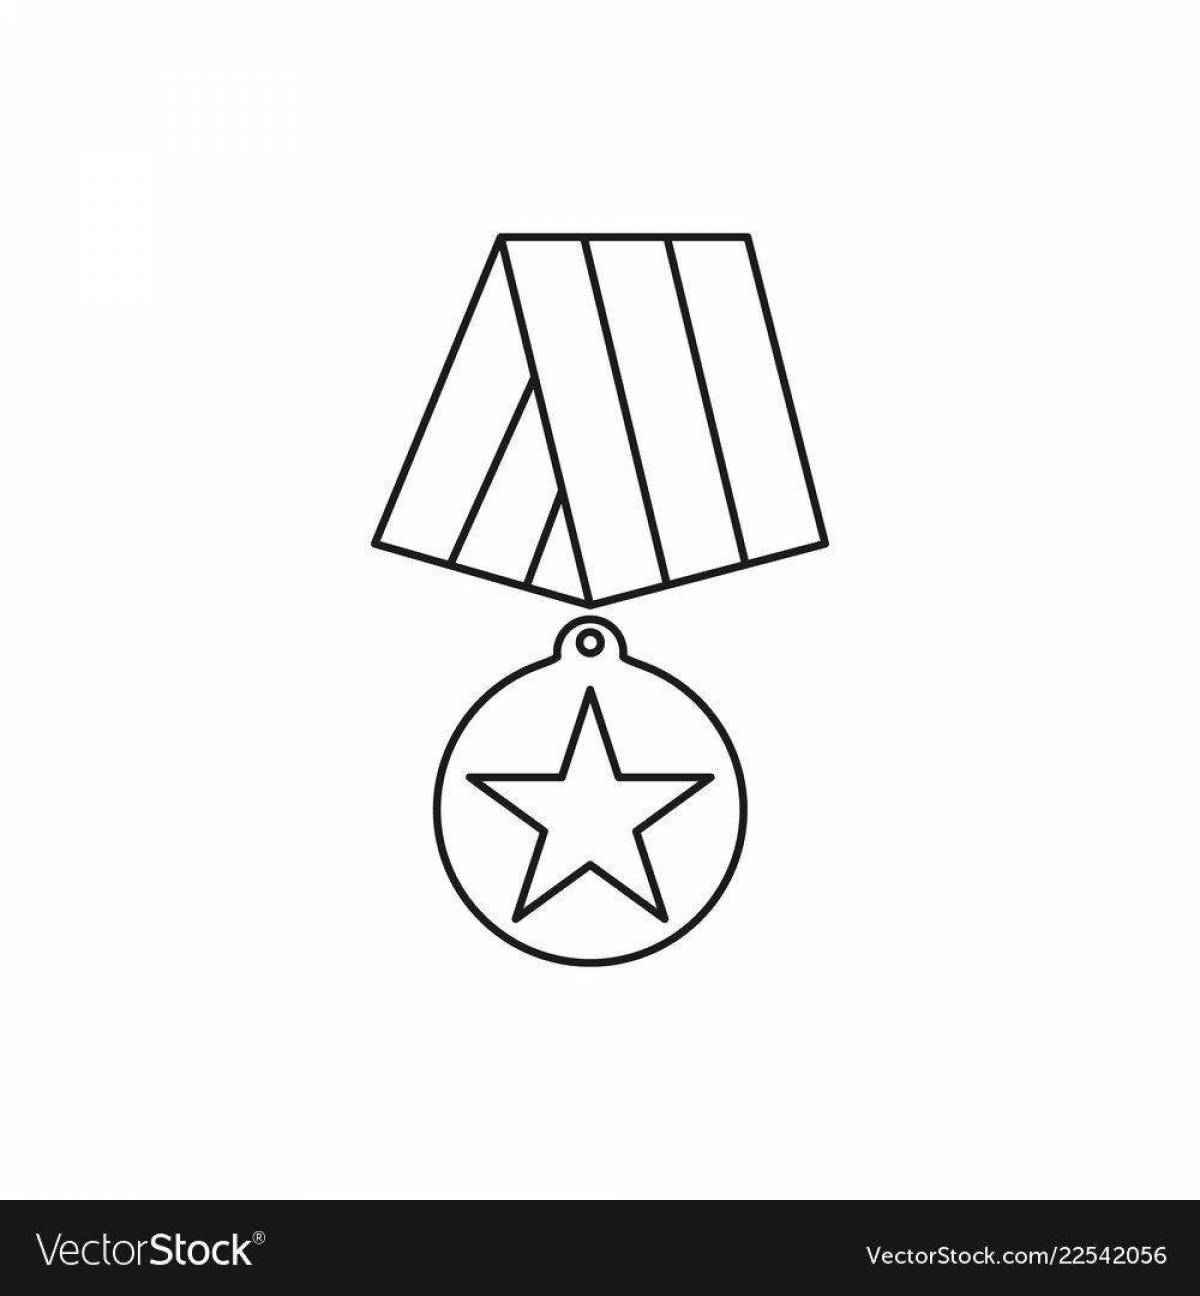 Colorful military star coloring book